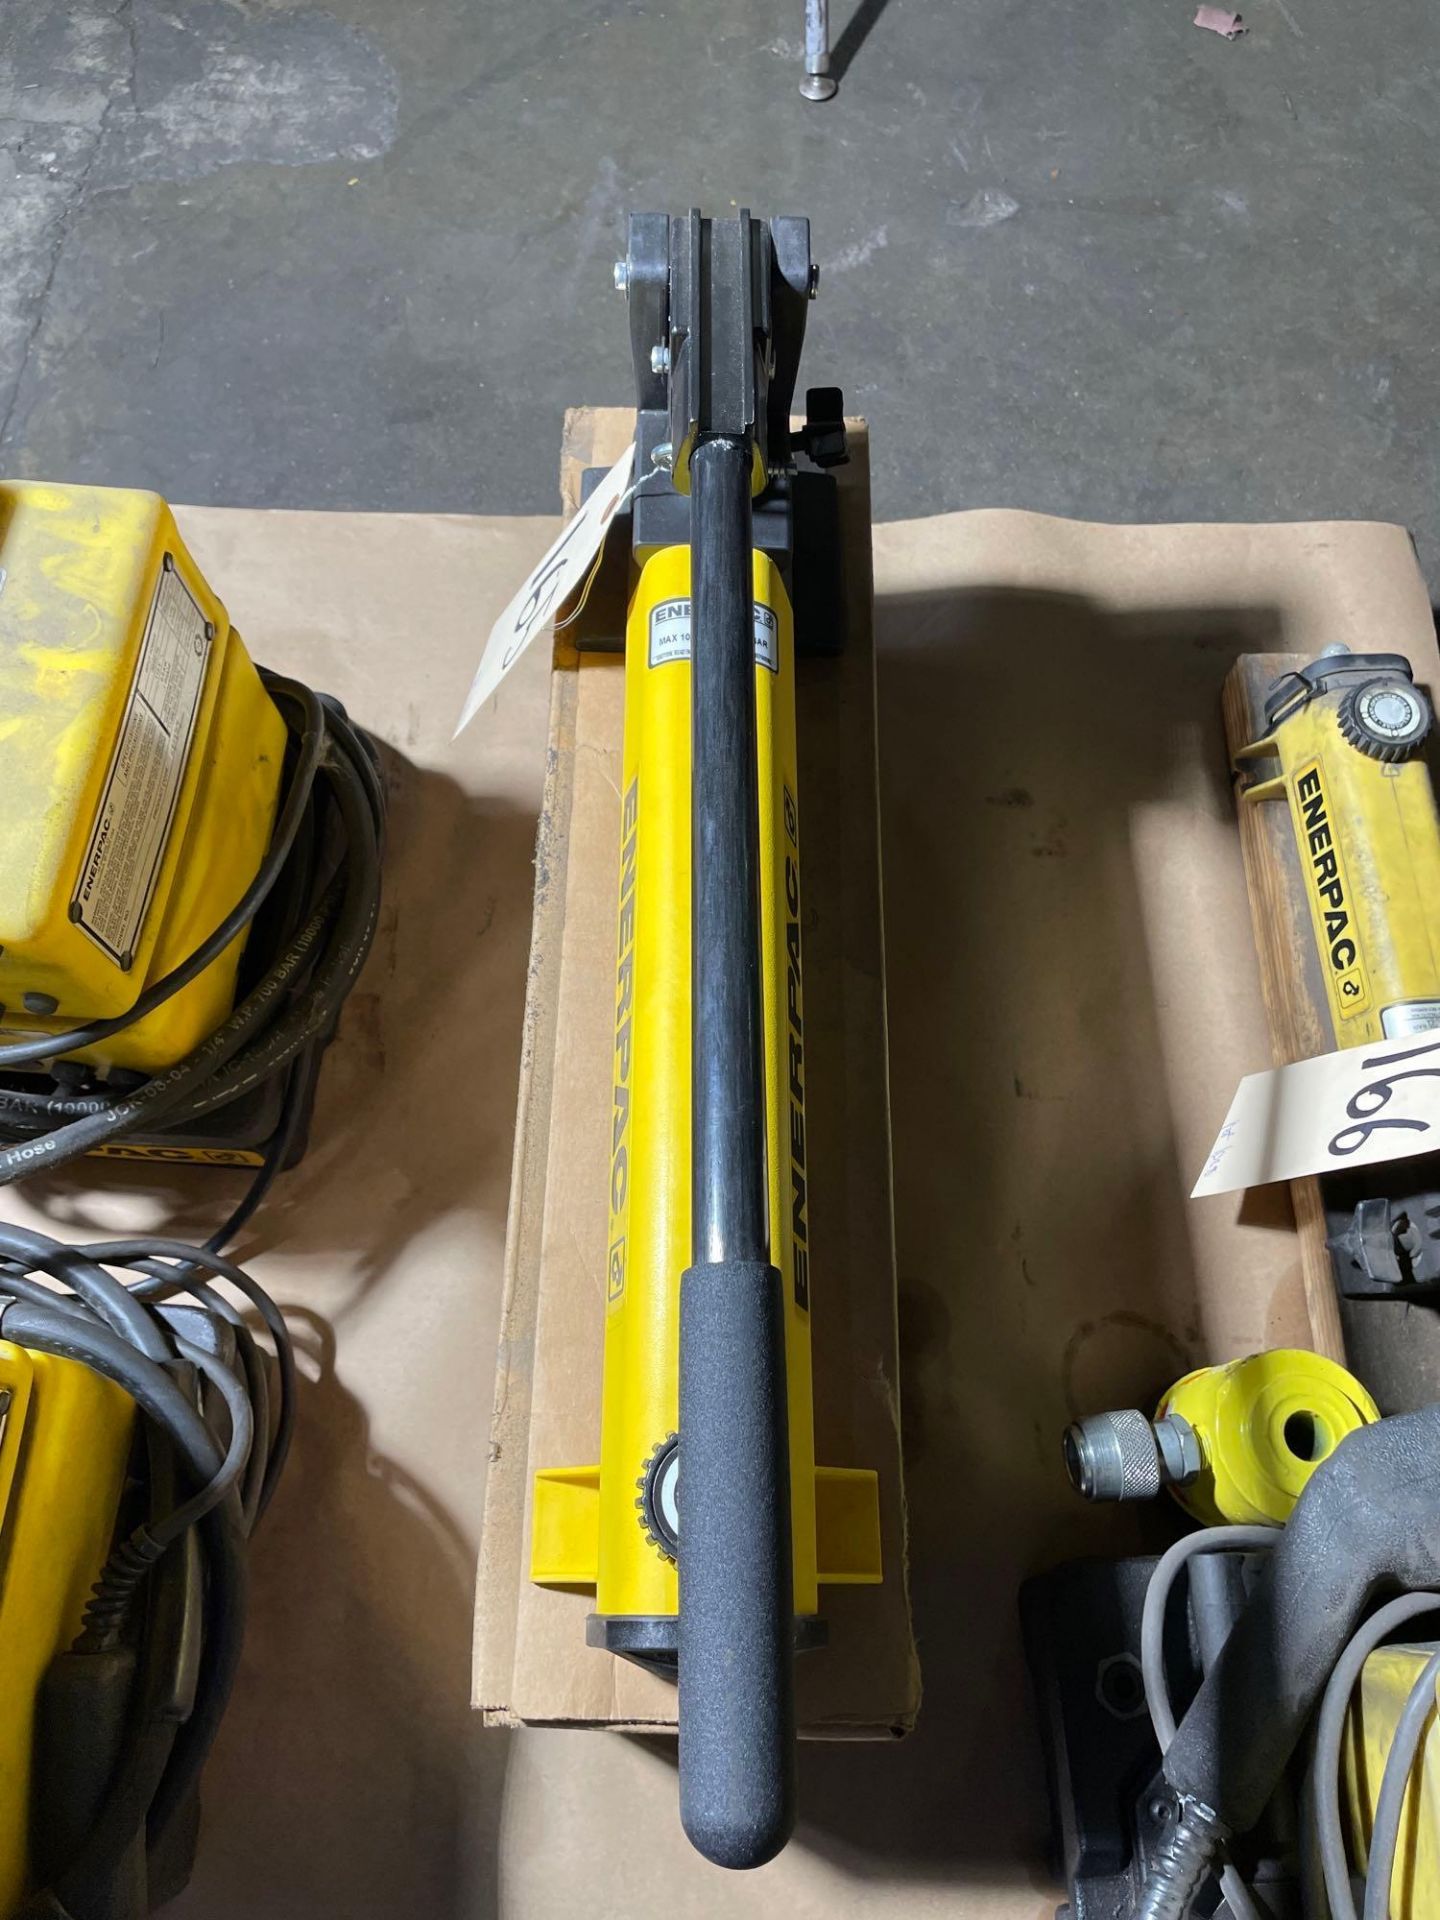 New in Box Enerpac Pump Hand Model P391 - Image 2 of 6